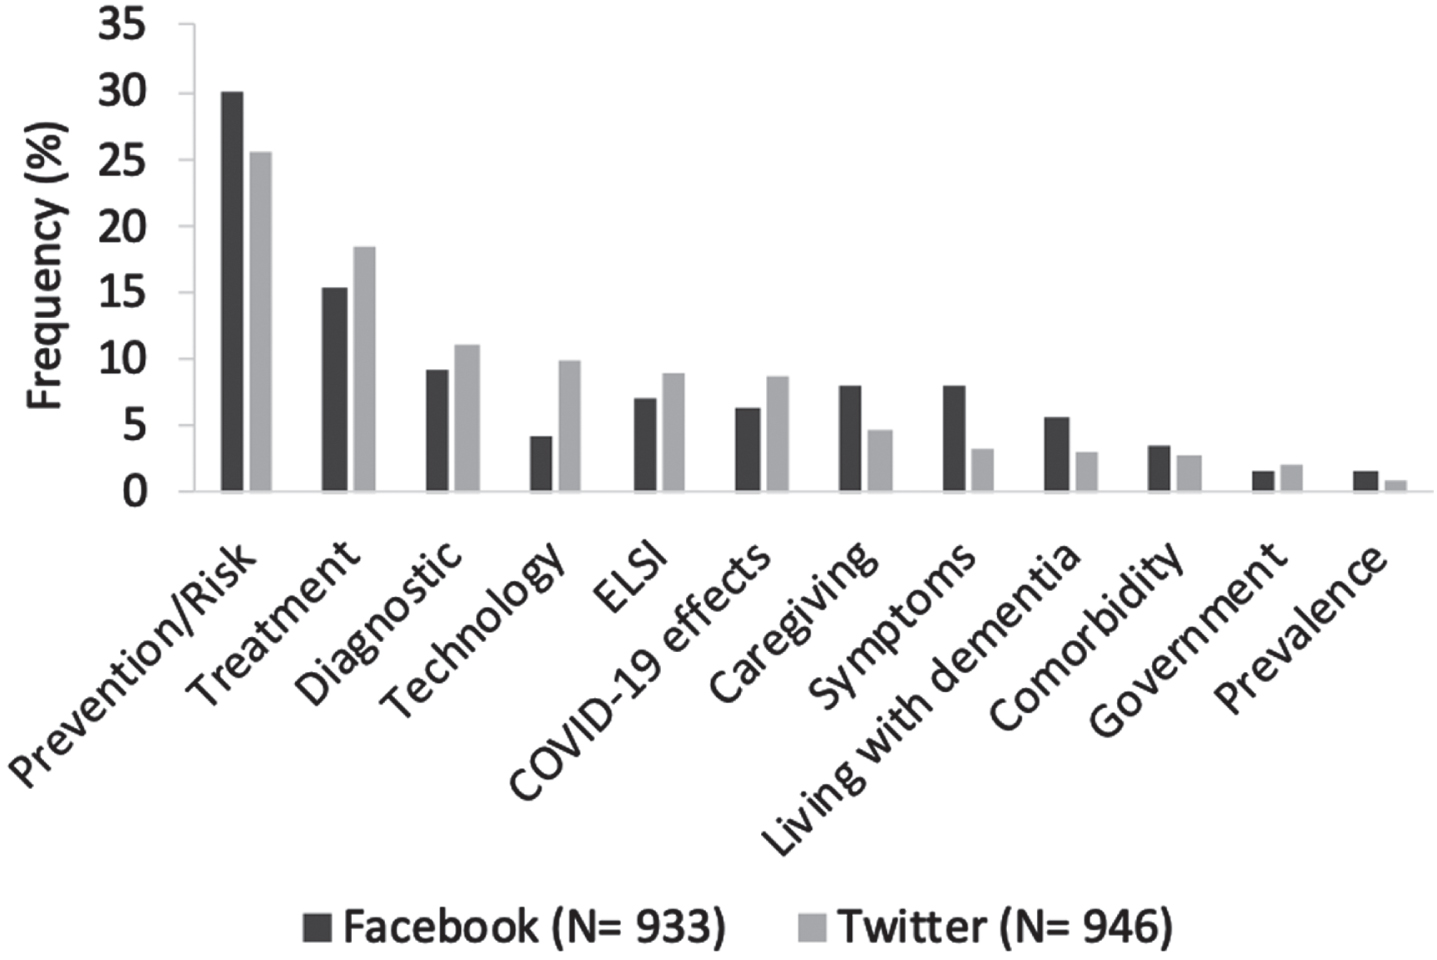 Dementia research content. Percentage of dementia research themes under ‘aspect of dementia’ on Facebook and Twitter. Percentages for each theme are of a total of the N codes indicated for each platform.